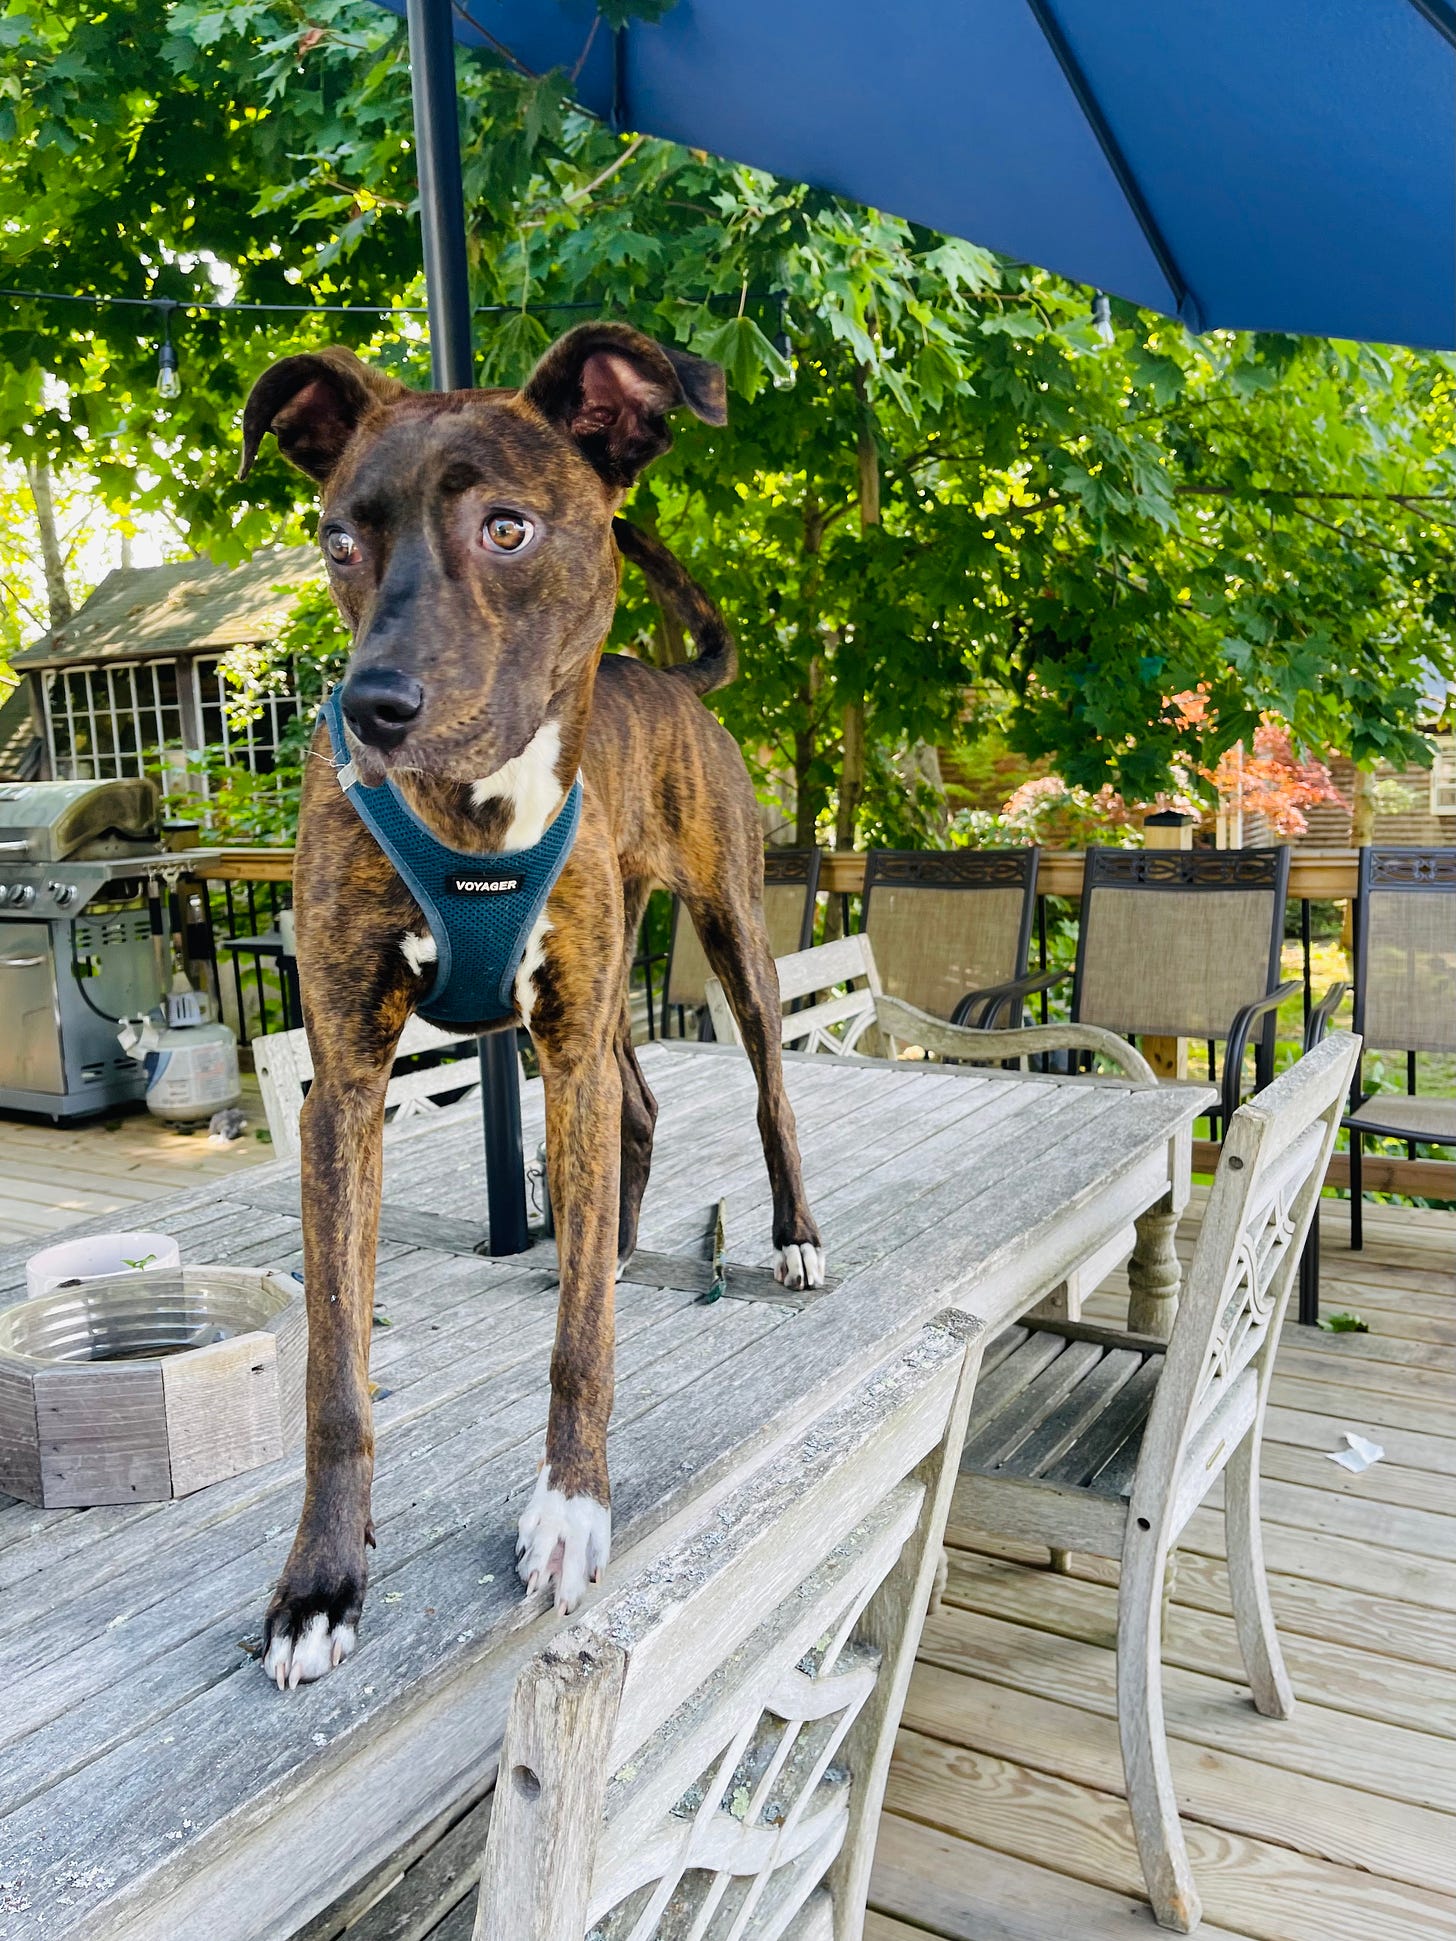 Puppy standing on outdoor table